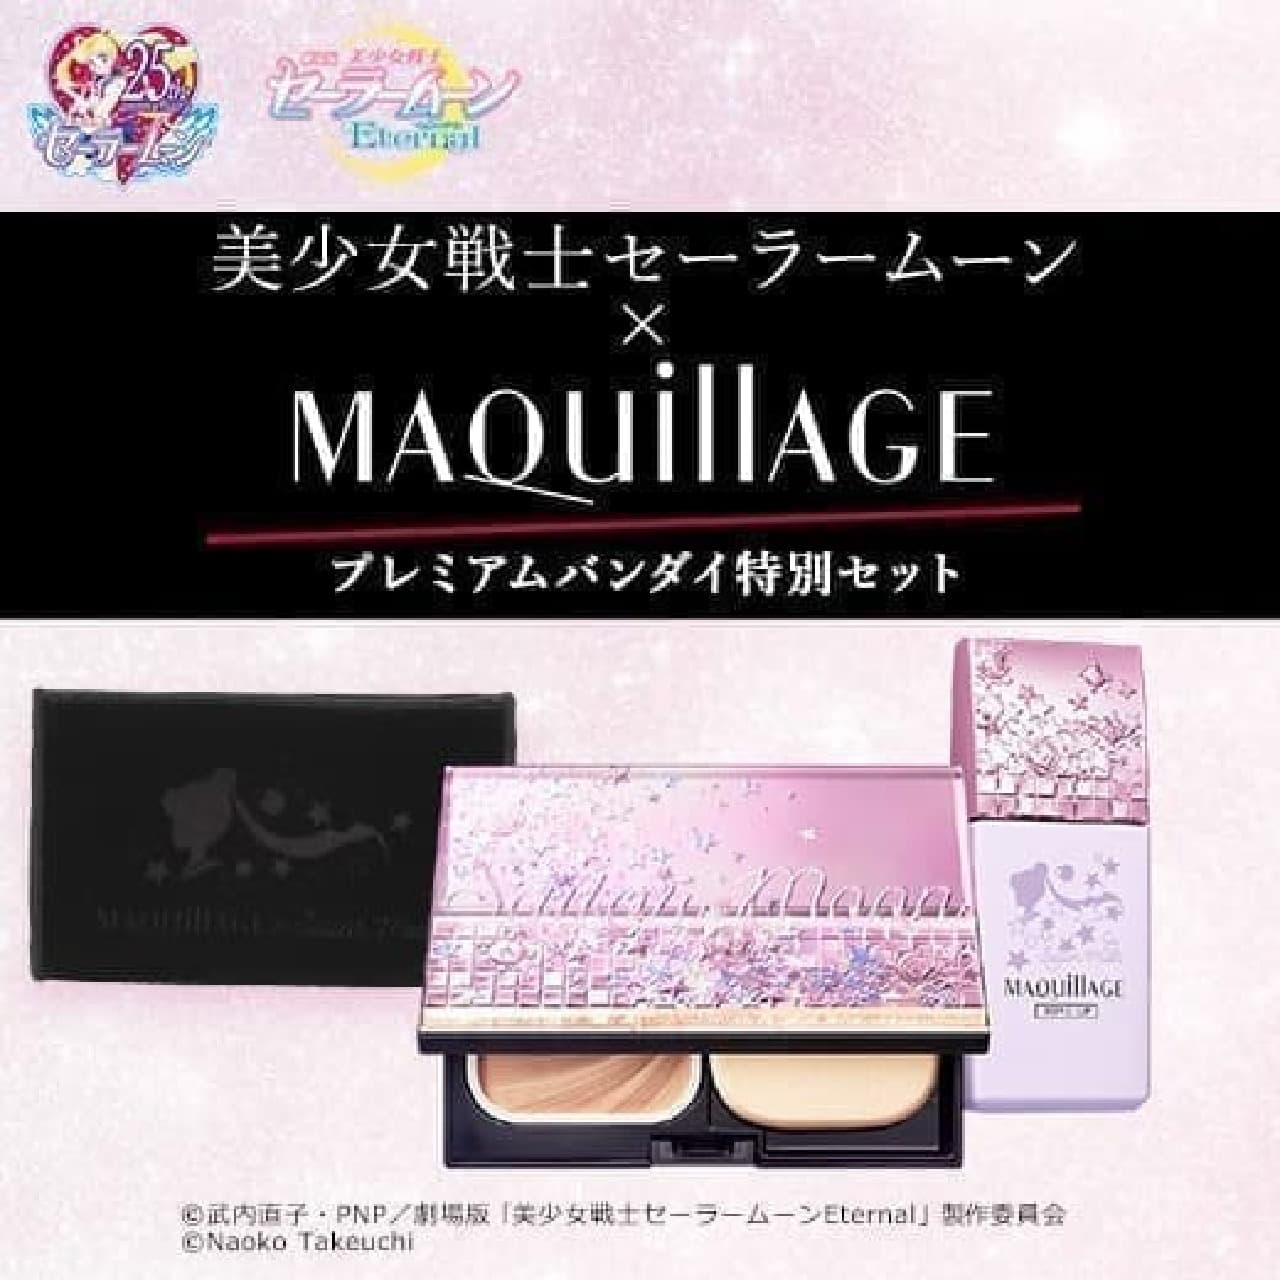 A cosmetic set of Sailor Moon and MaQuillage will be released 